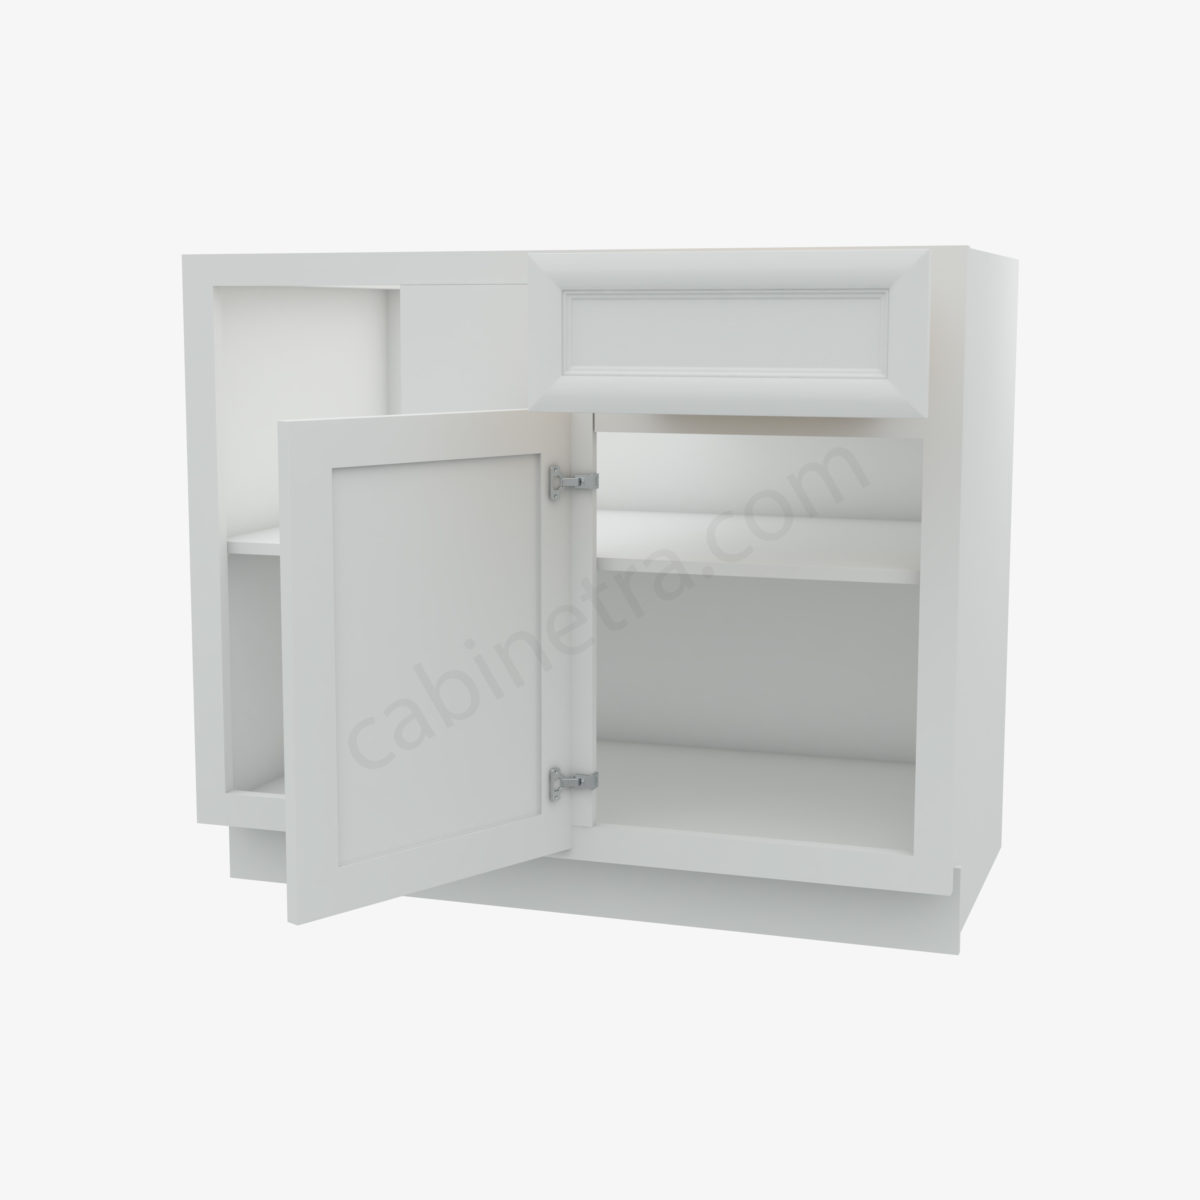 KW BBLC42 45 39W 5  Forevermark K White Cabinetra scaled